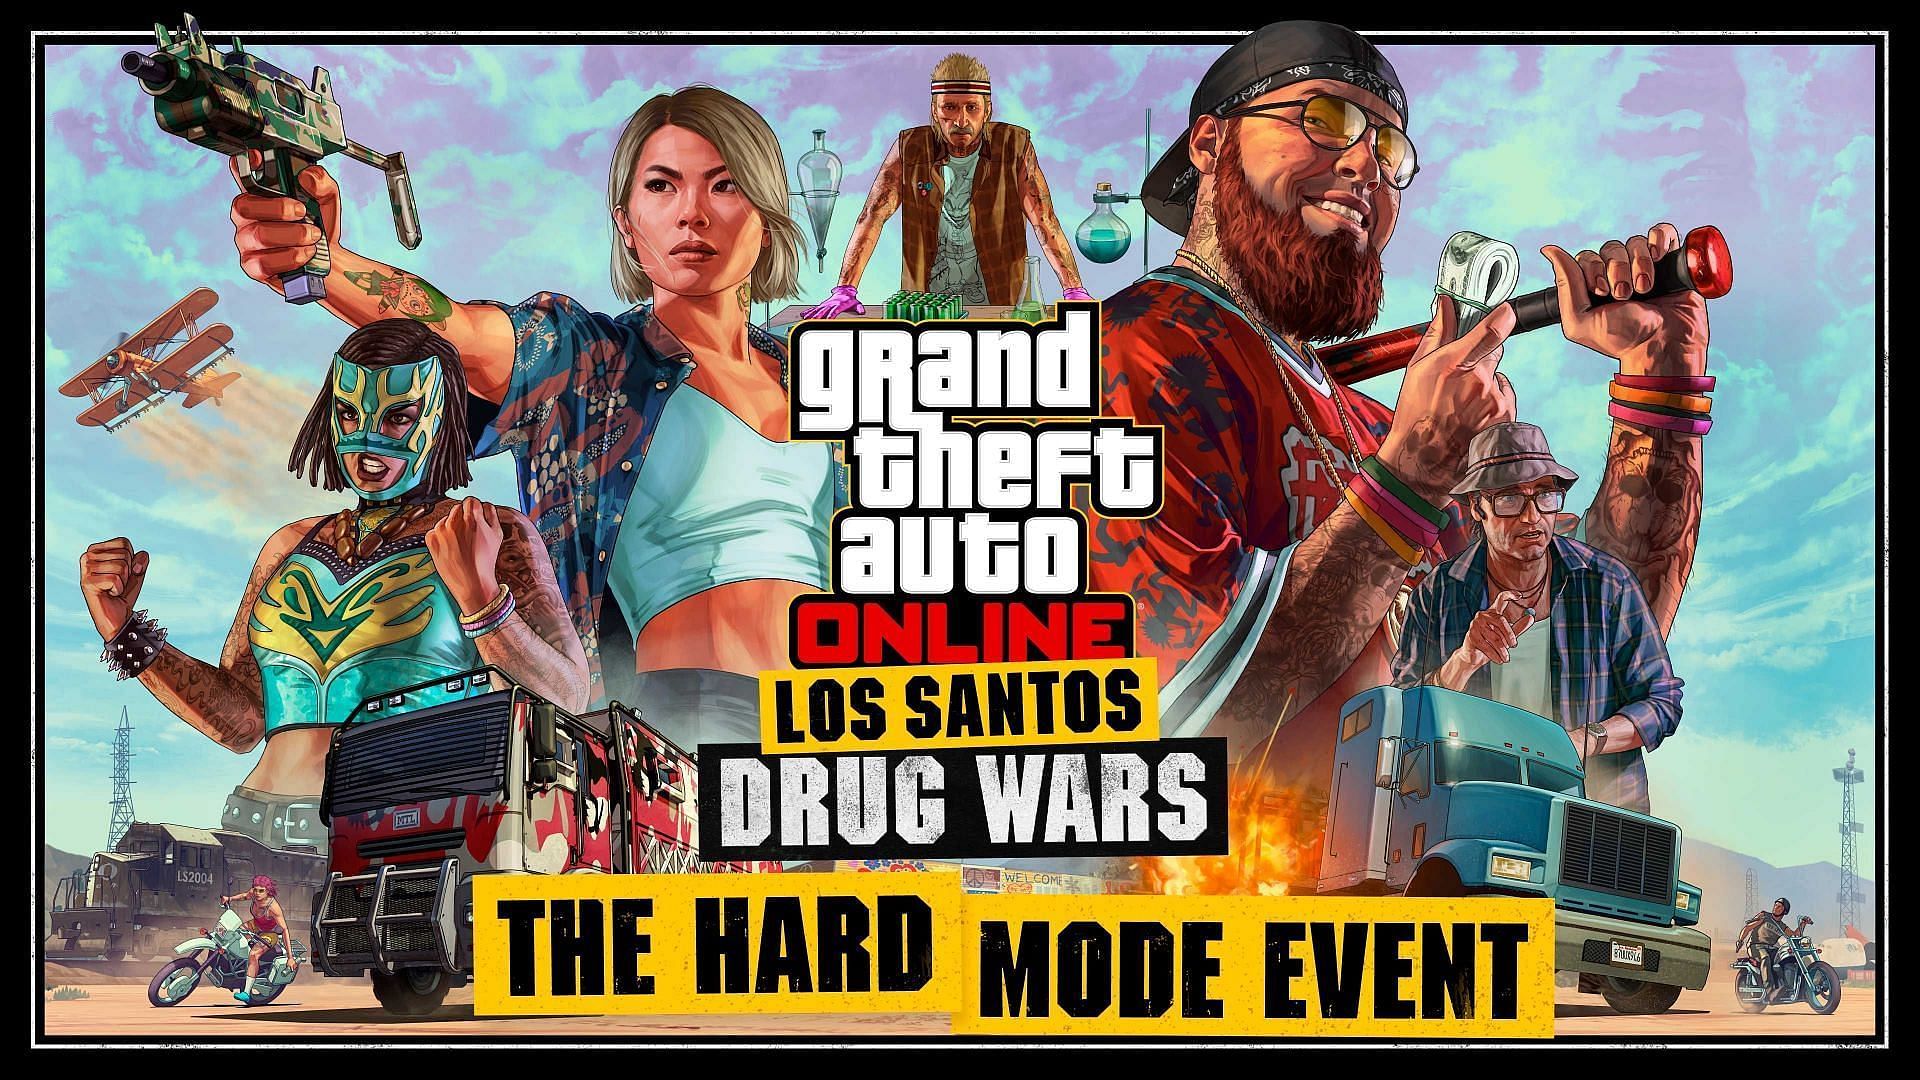 The official banner used for this event (Image via Rockstar Games)